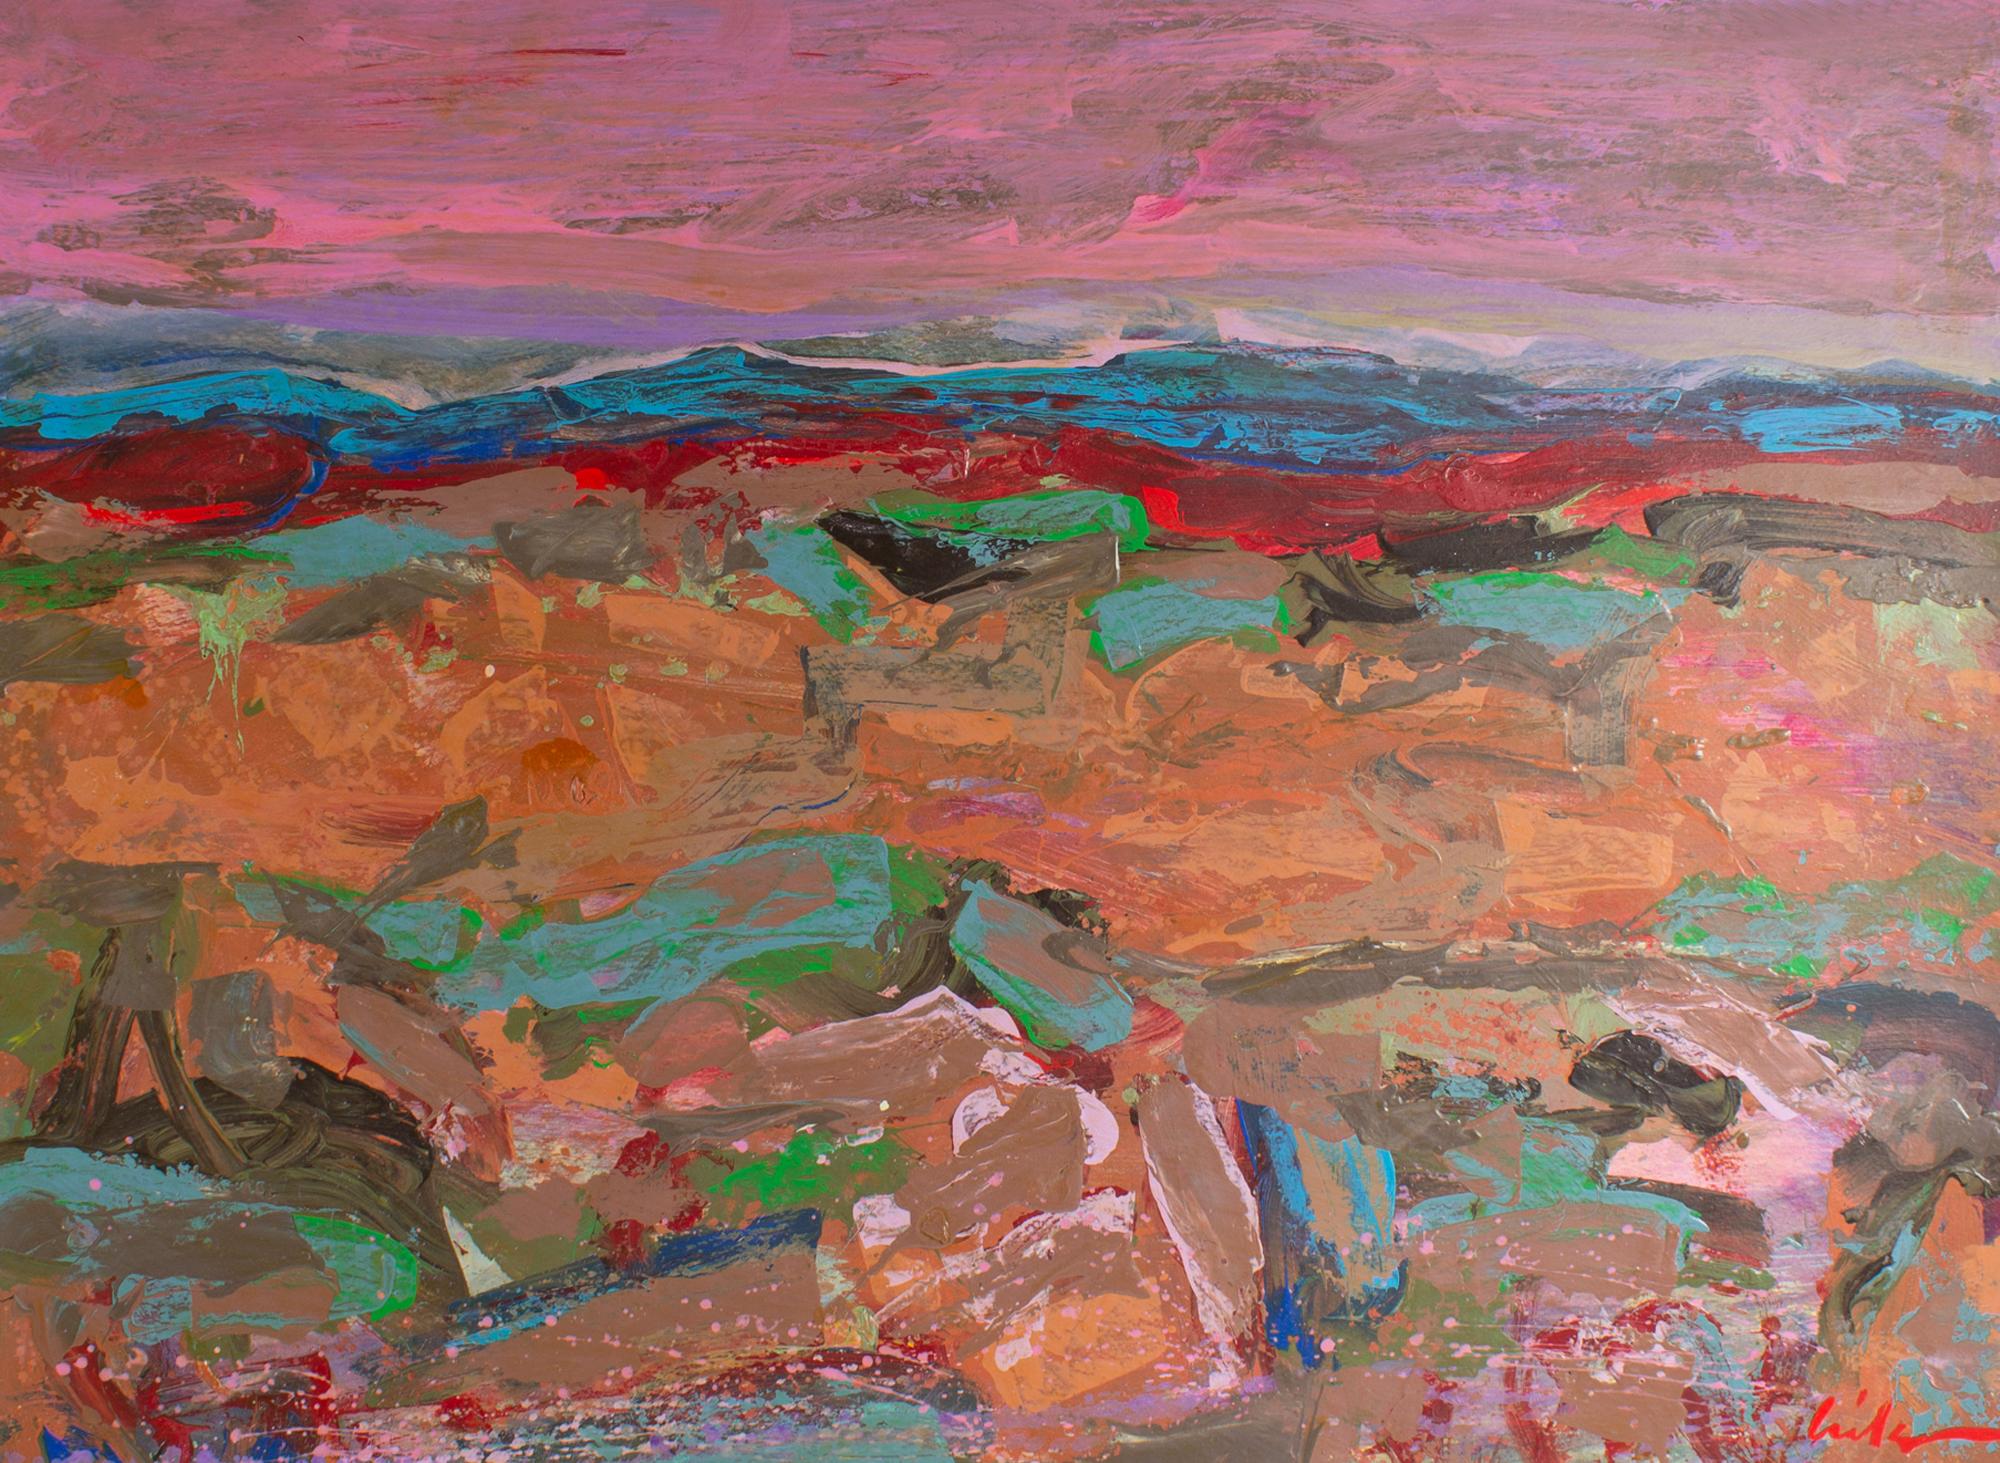 A 1980s acrylic on paper painting by the American artist Harry Hilson (1935-2004). This abstract work depicts a vibrant landscape composed of frenetic brushwork that forms a rolling landscape with distant mountains all under a saturated pink sky.